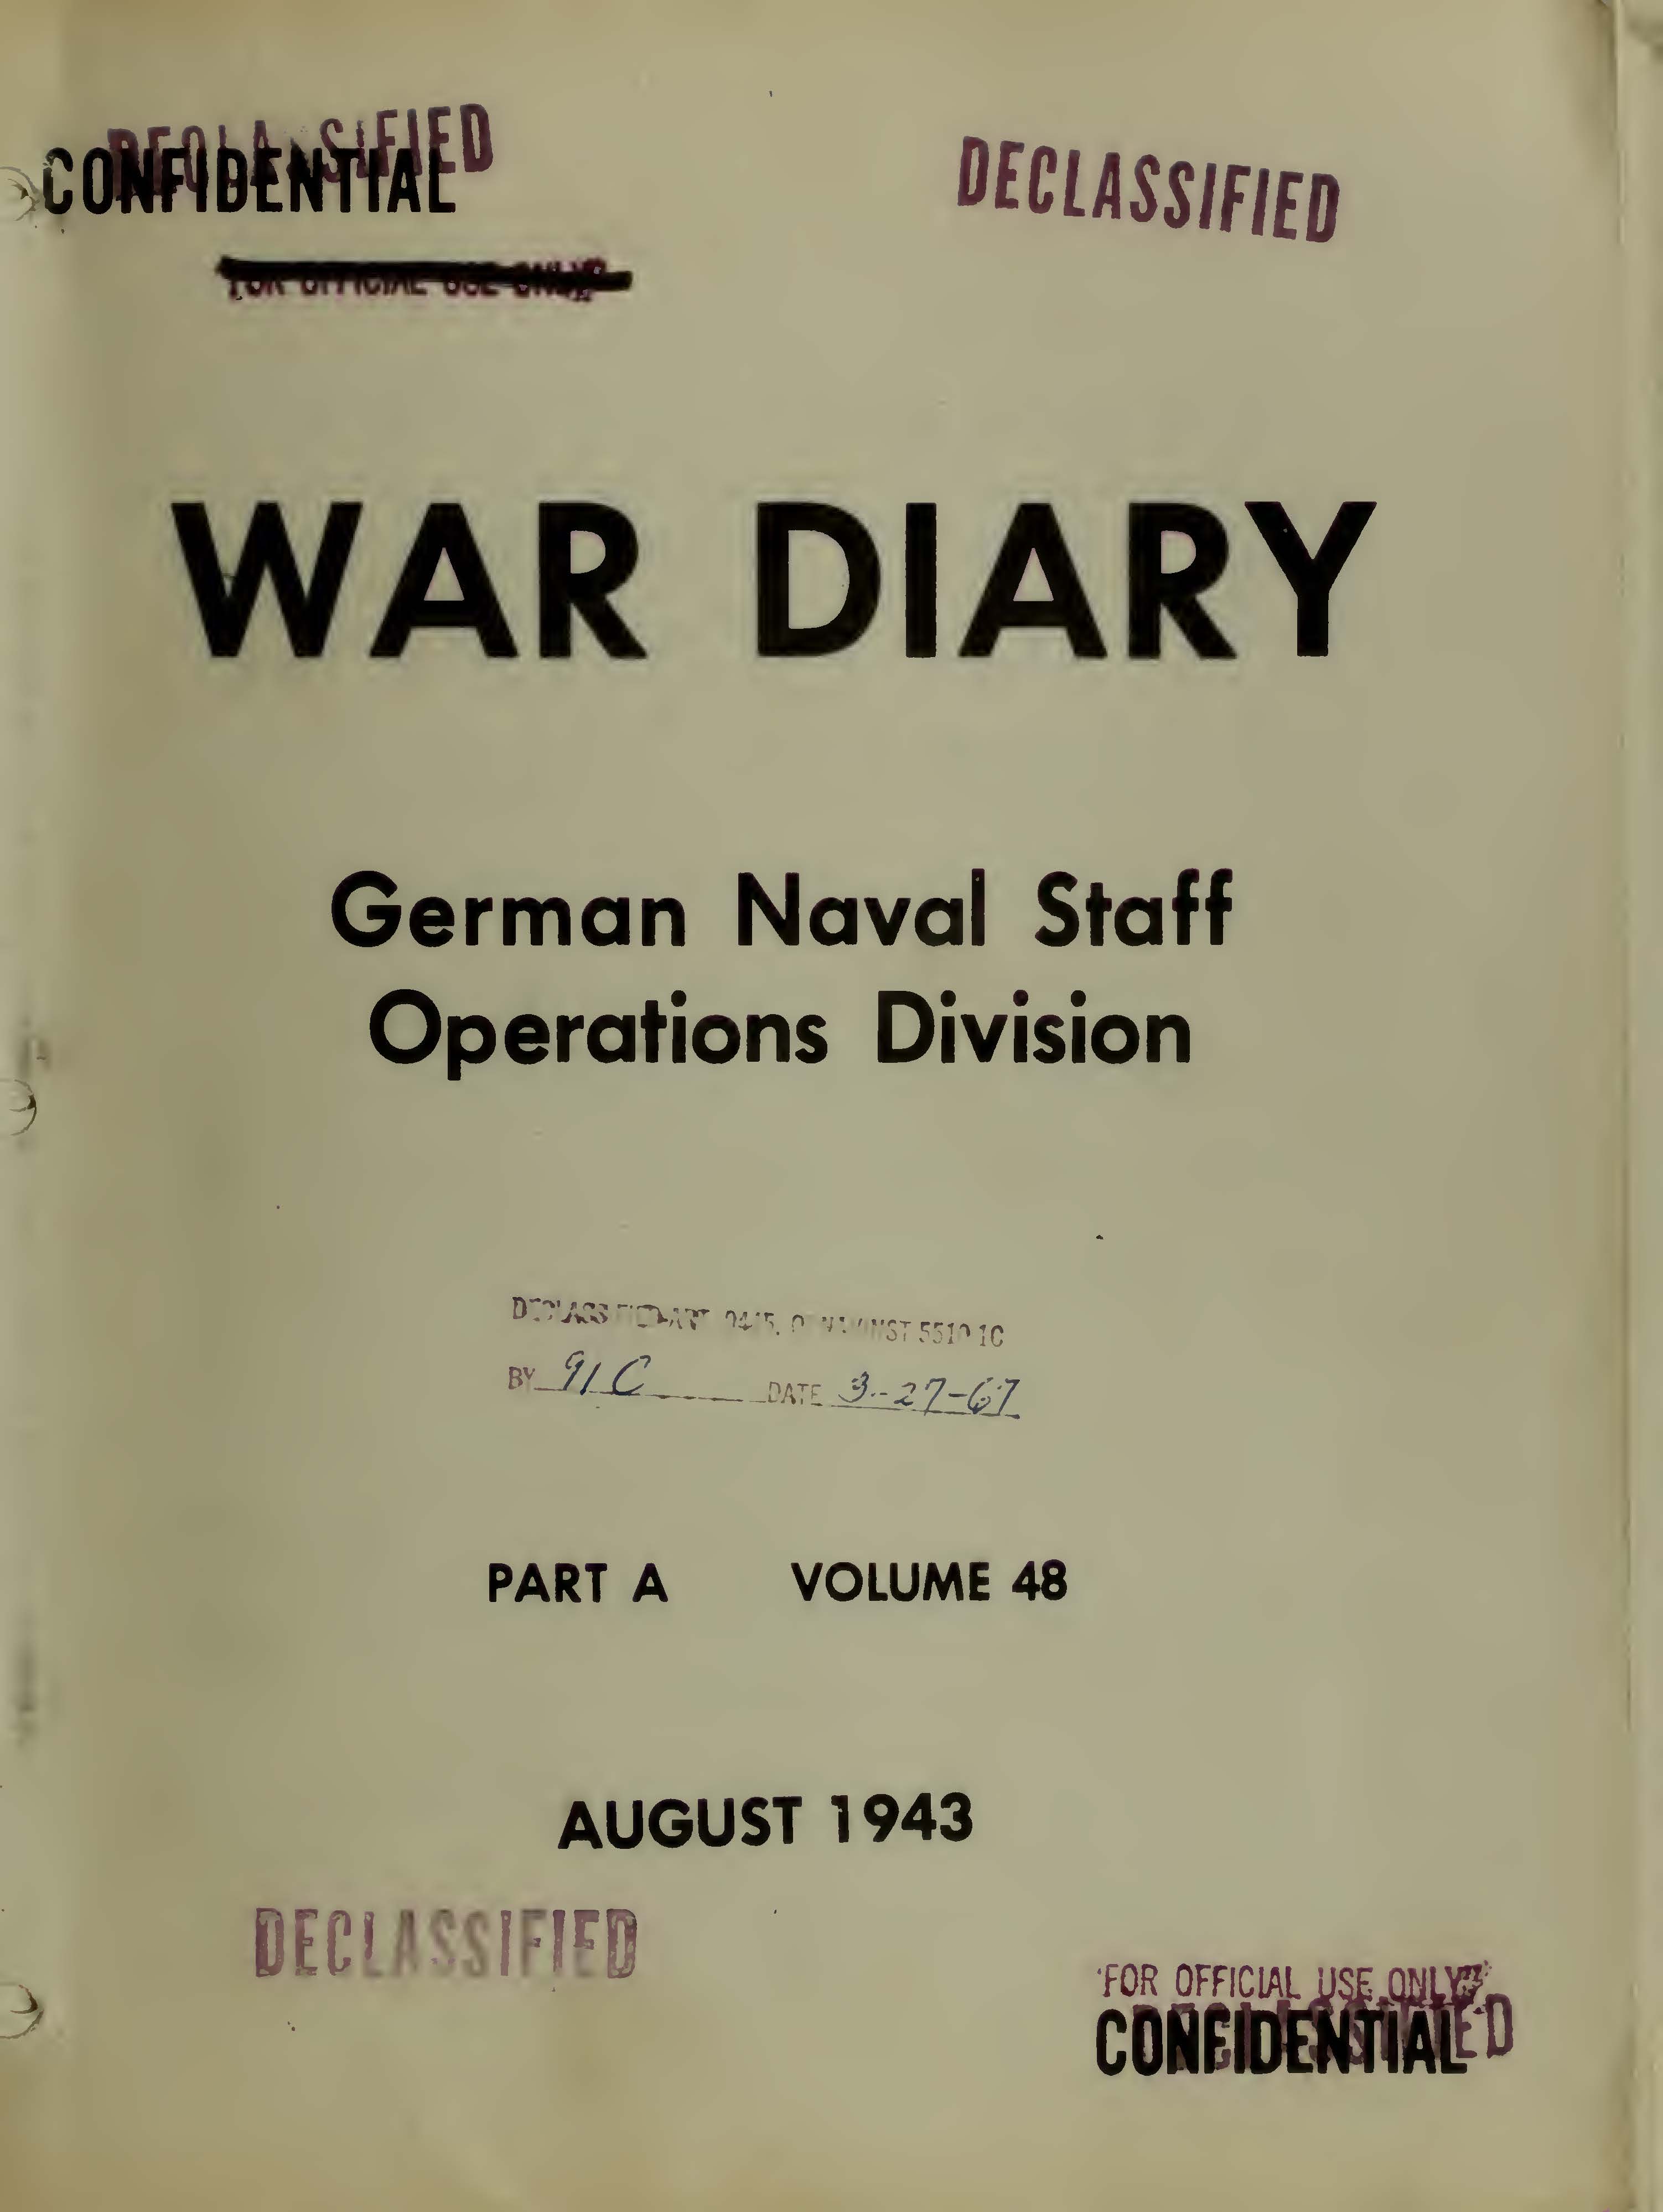 War Diary of German Naval Staff (Operations Division) Part A, Volume 48, August 1943